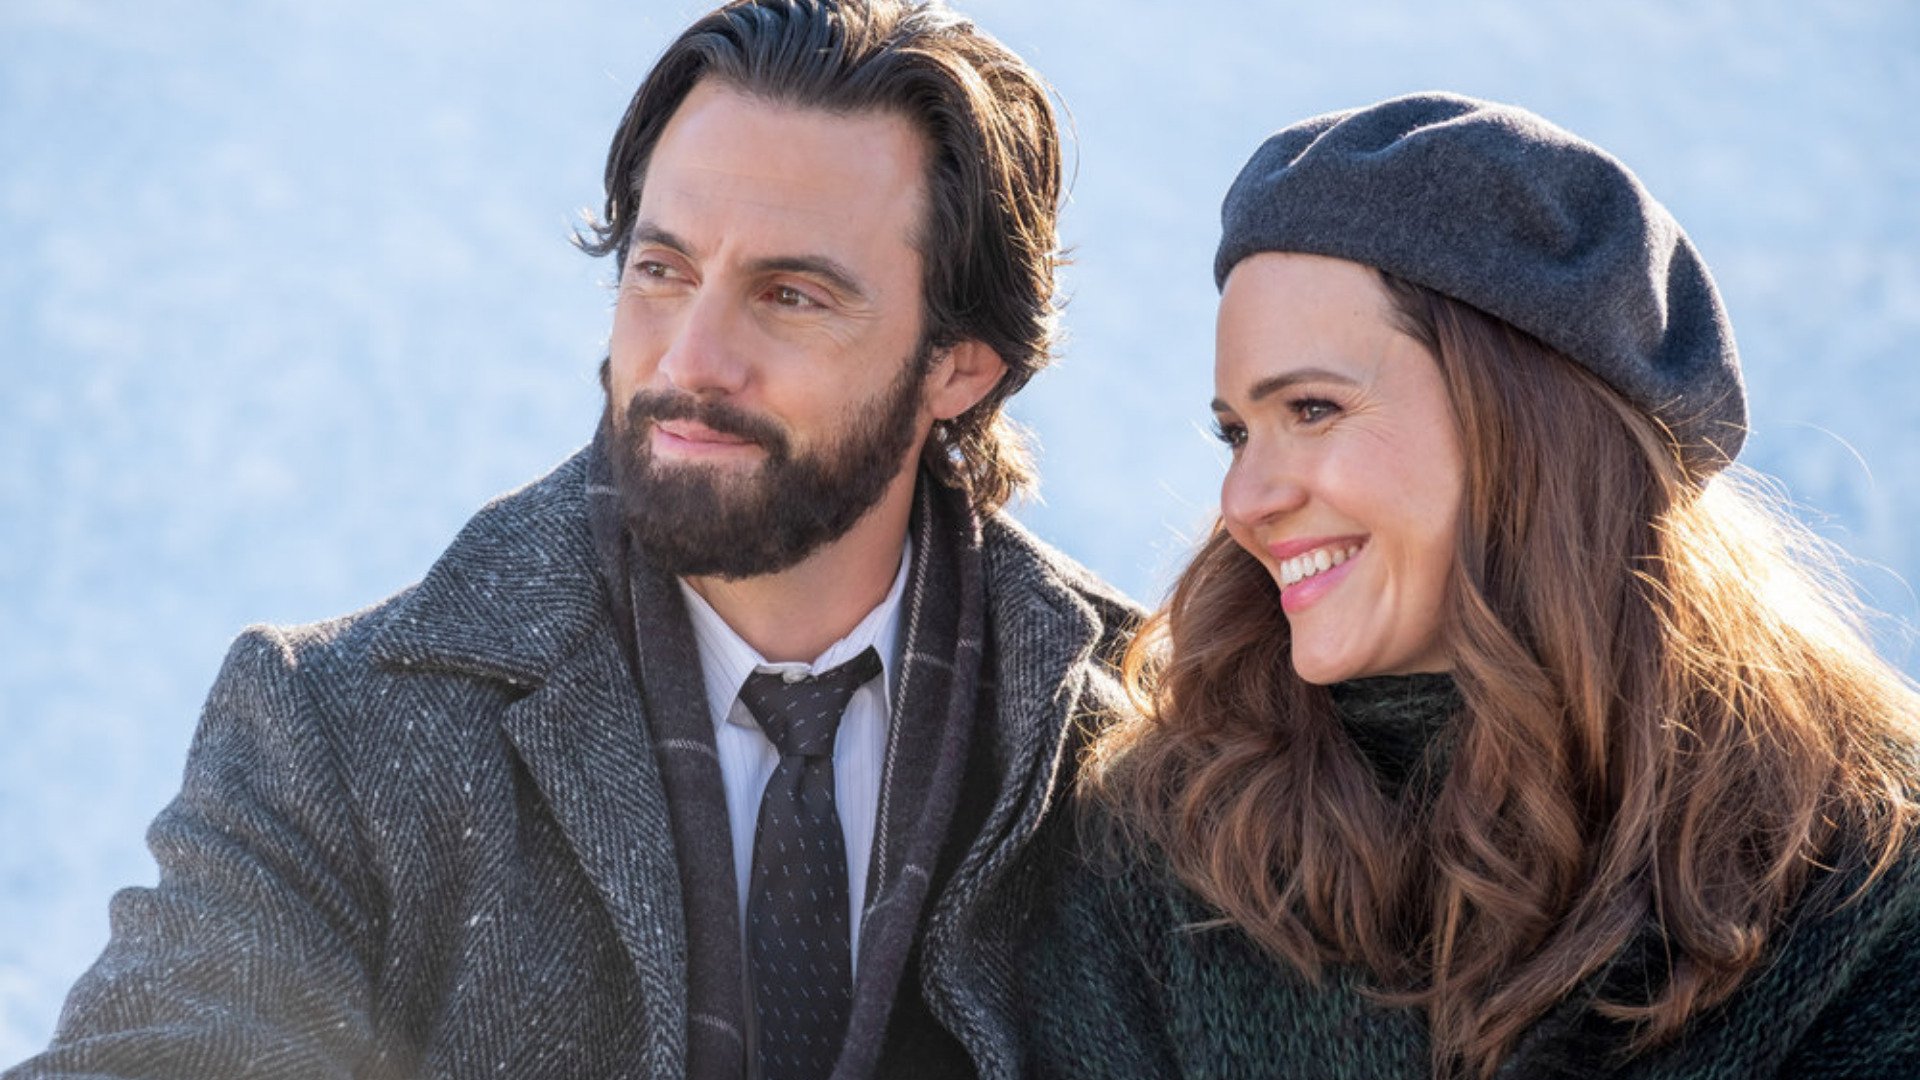 Milo Ventimiglia as Jack and Mandy Moore as Rebecca watching their kids skate in the snow in ‘This Is Us’ Season 6 Episode 4